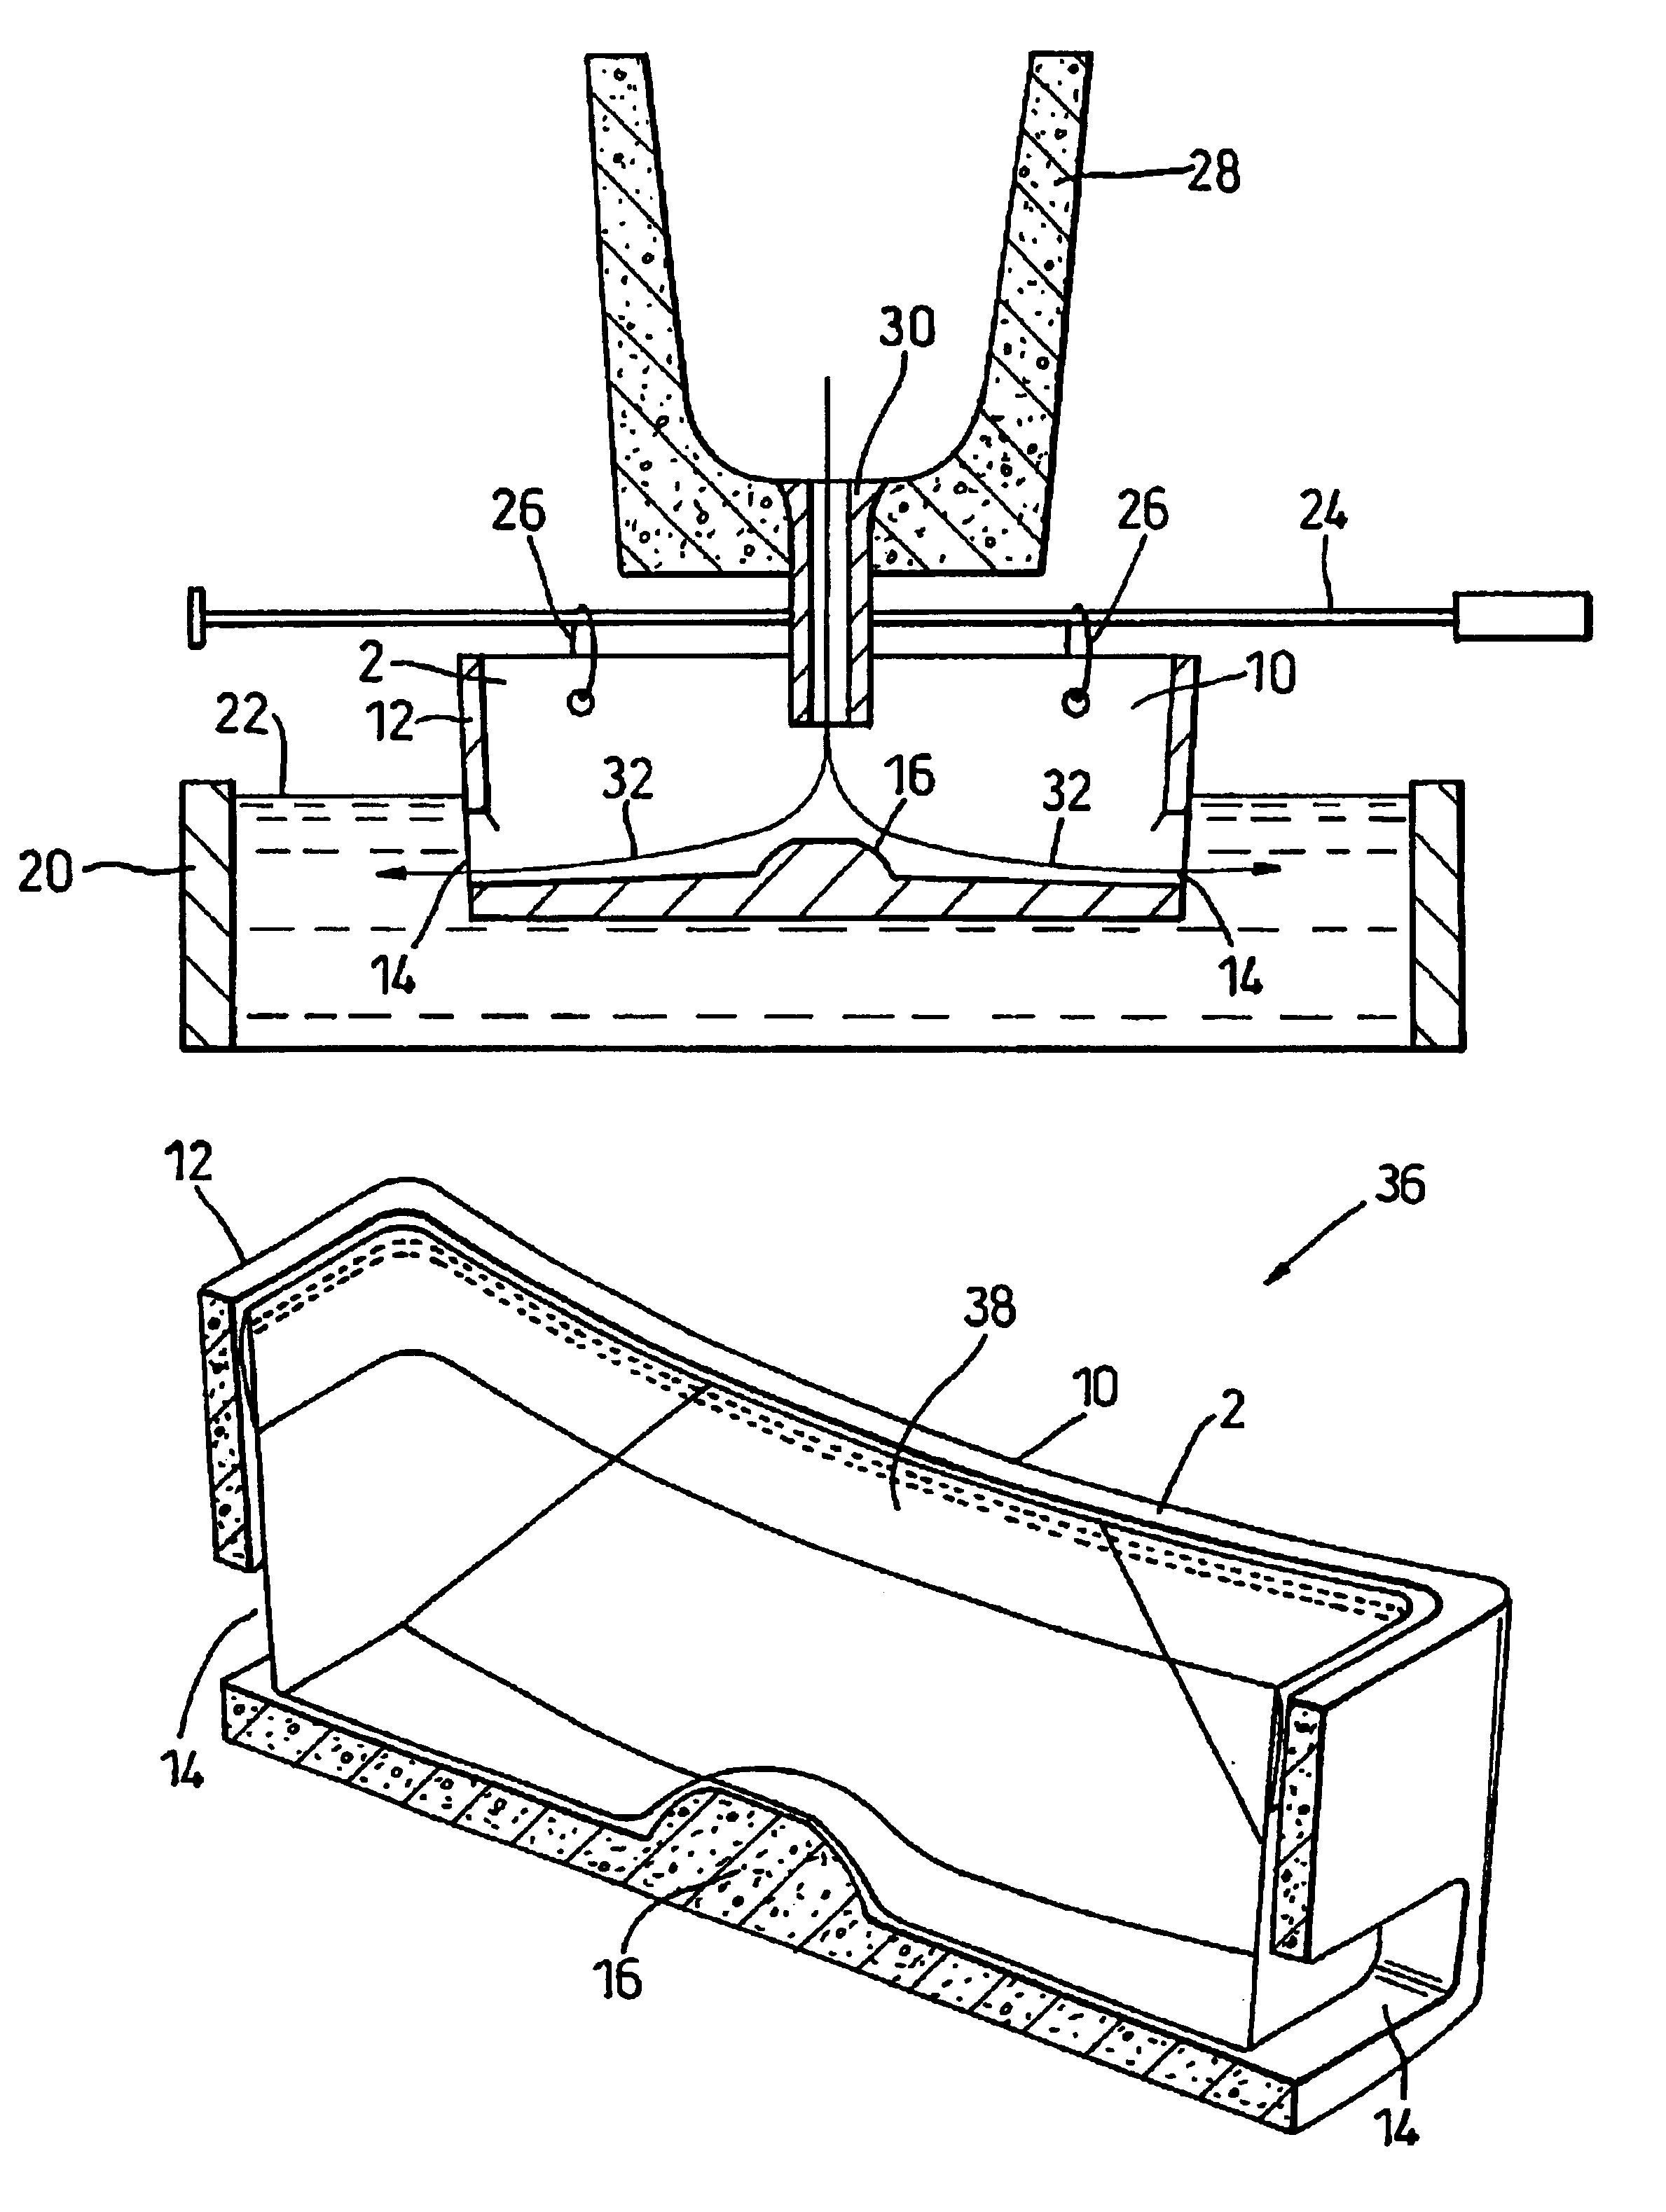 Distributor device for use in metal casting